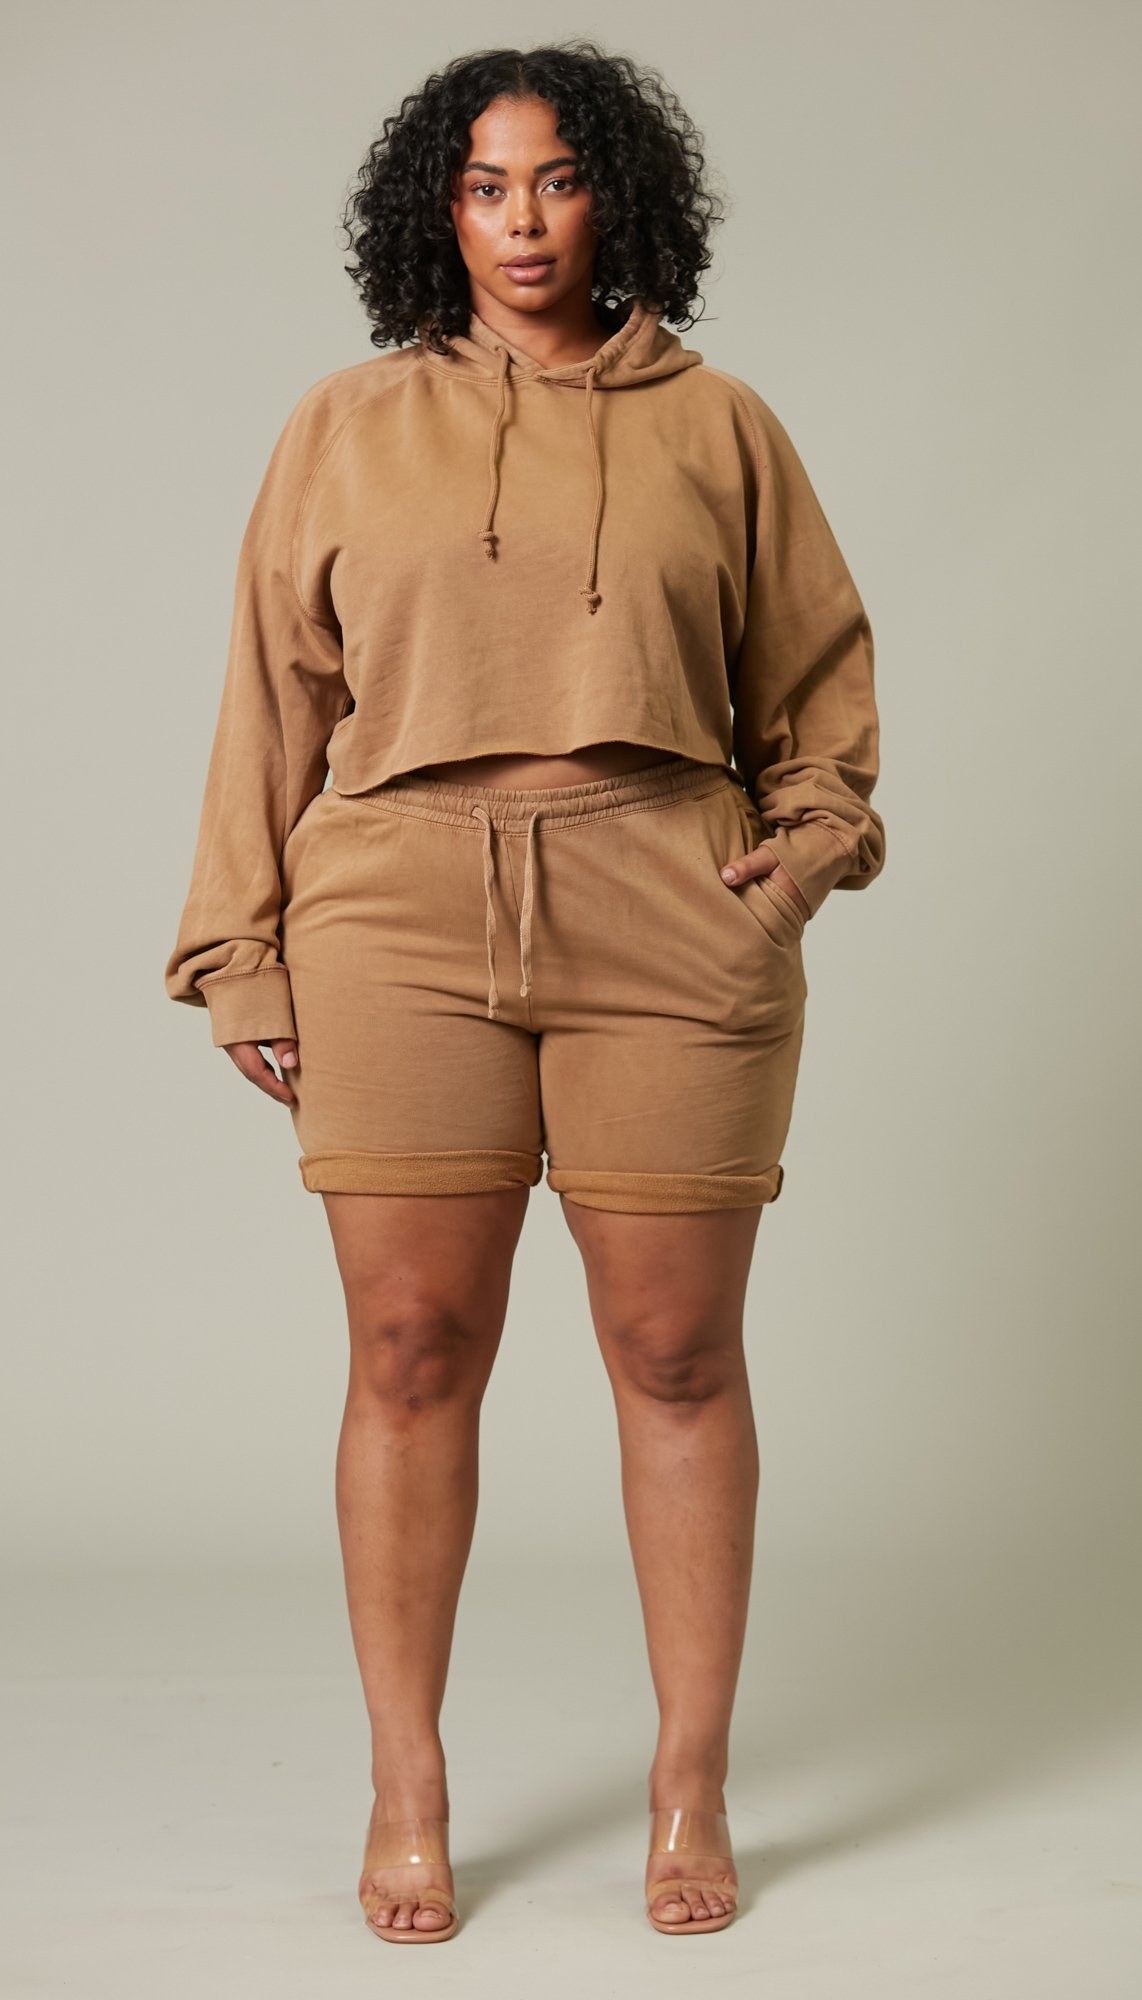 Model is wearing a brown hoodie and shorts set